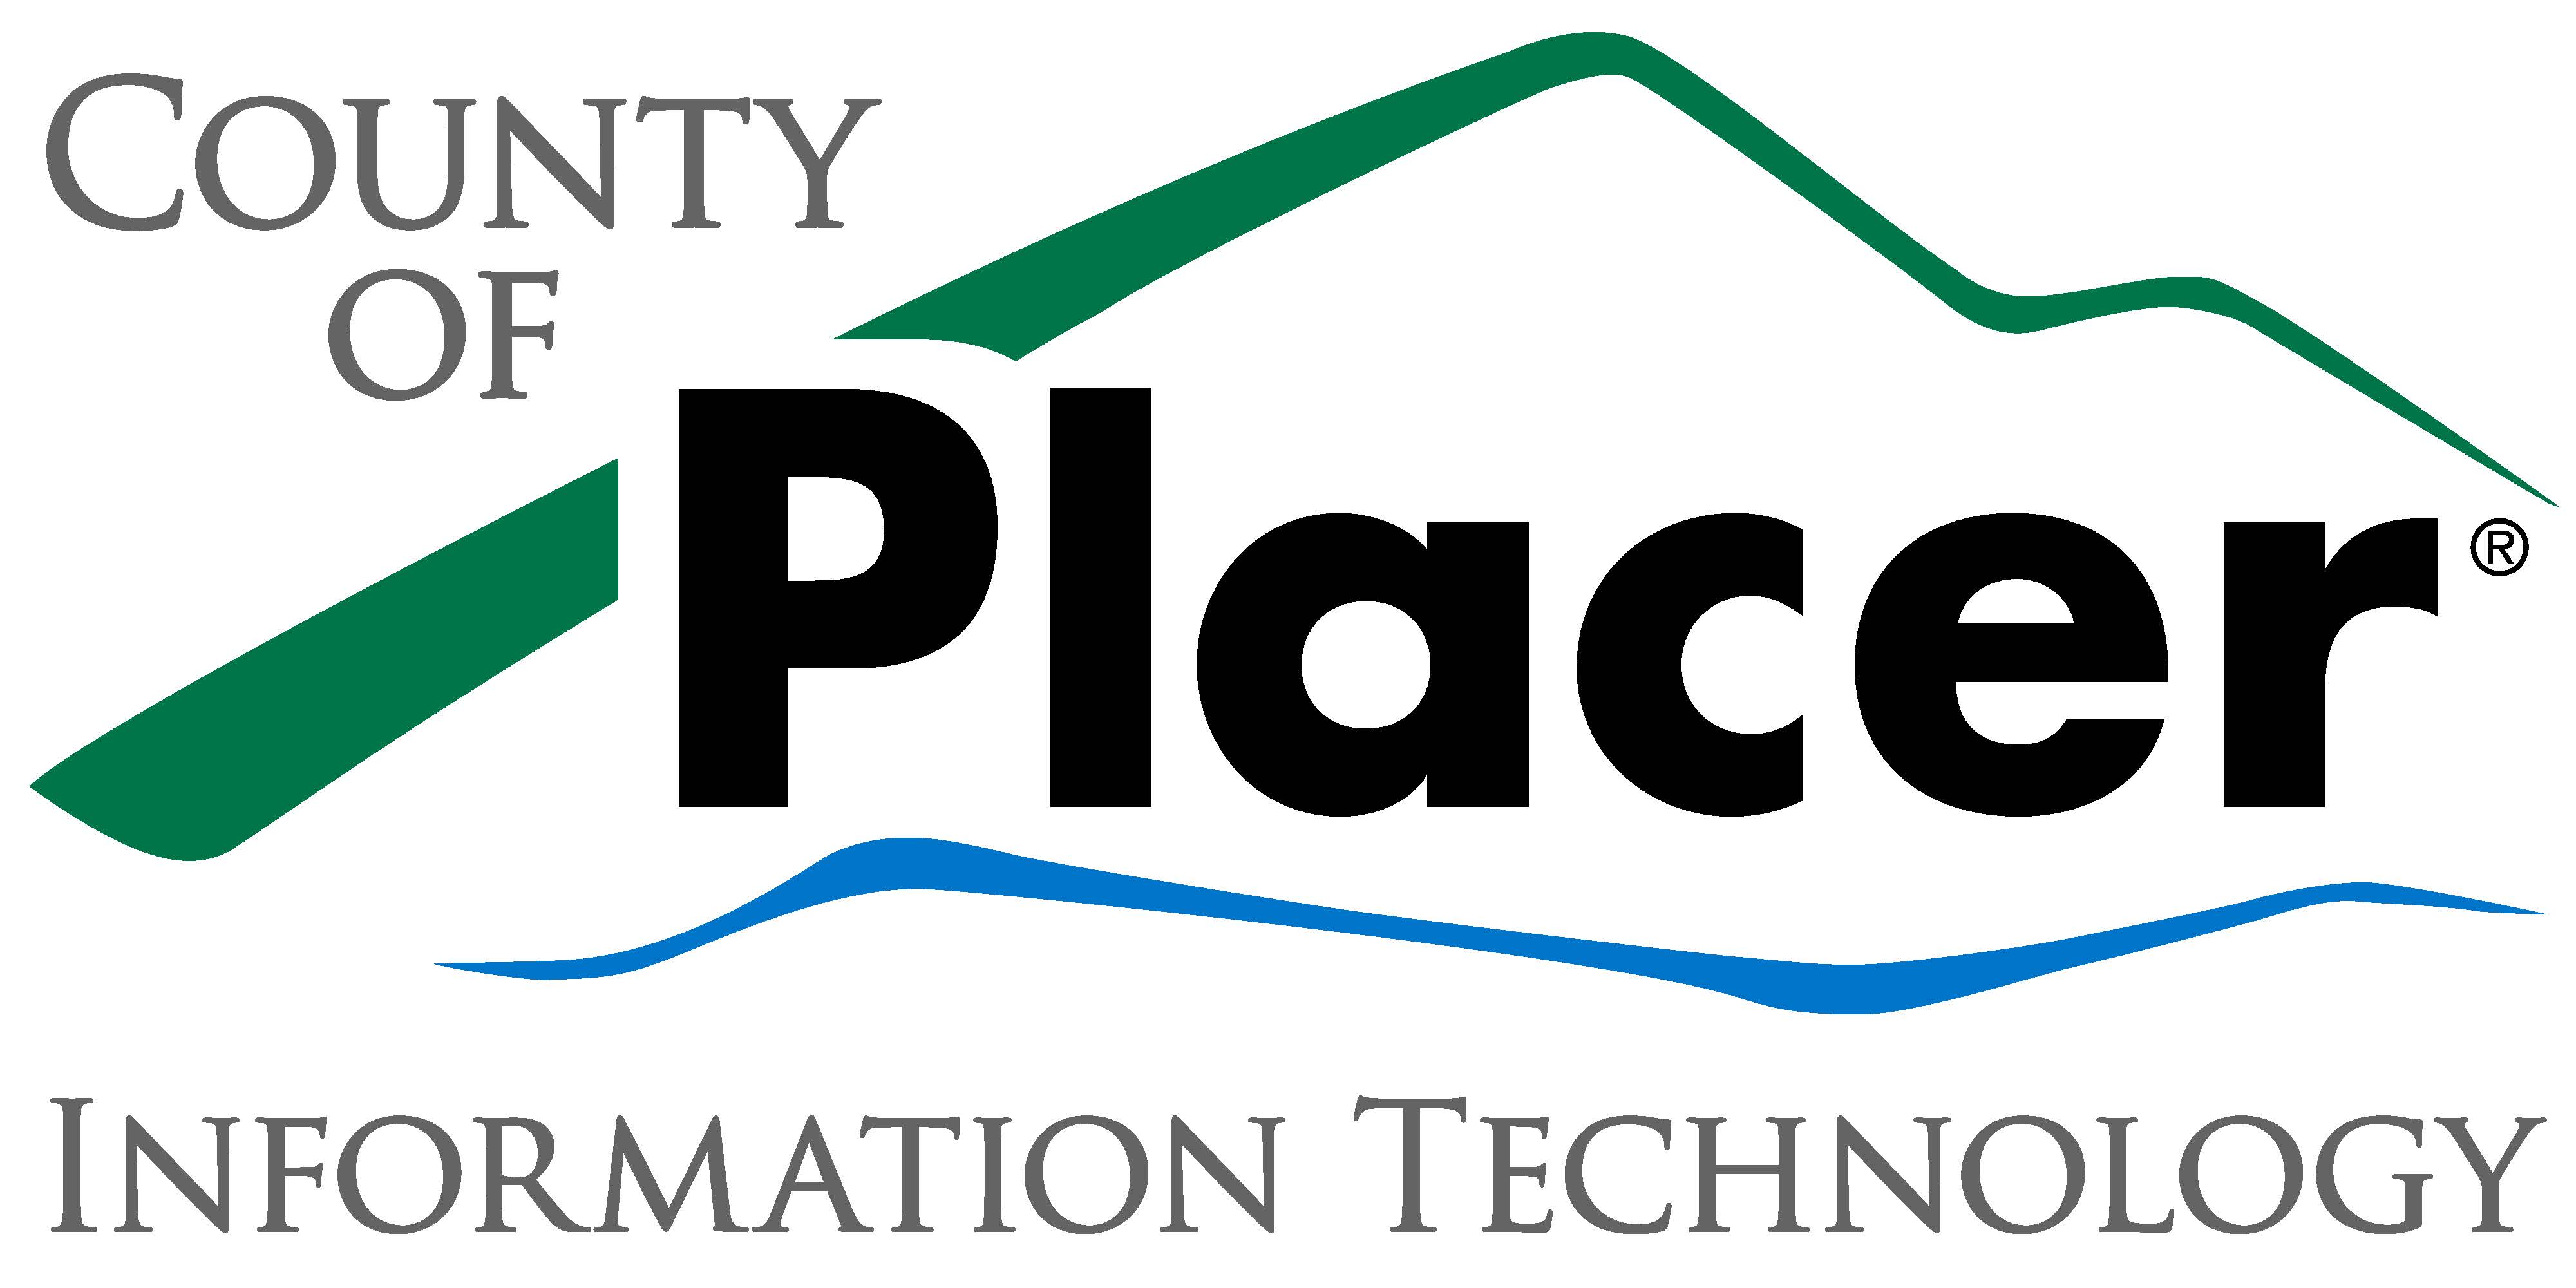 County of Placer Information Technology